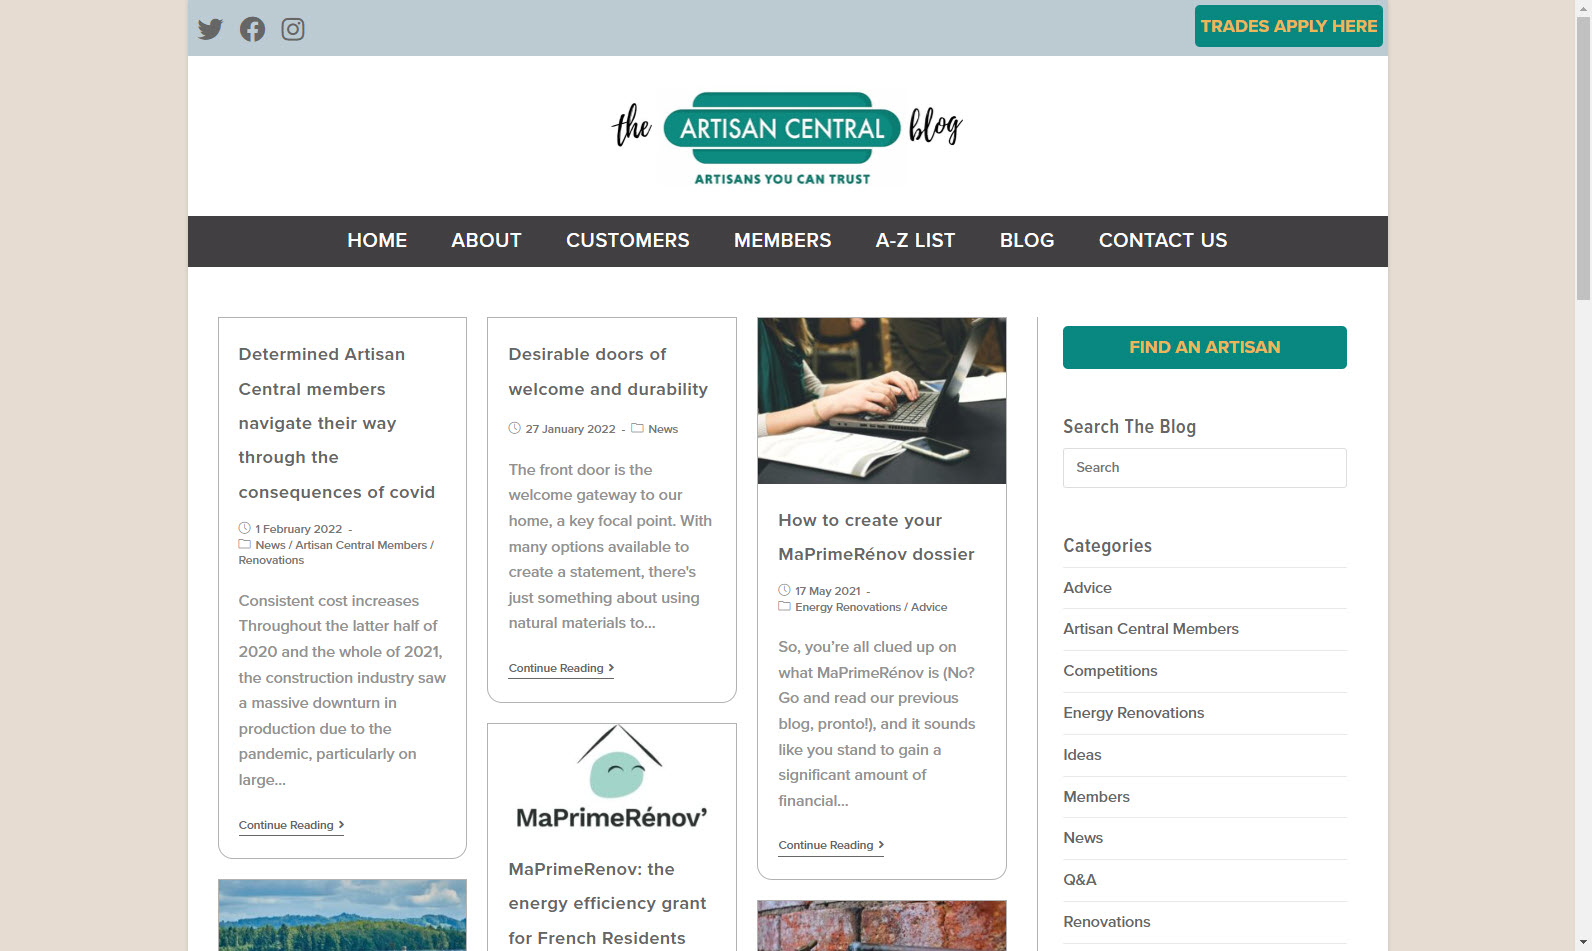 A screenshot of the Artisan Central blog page showing the menu, list of categories and the latest blog posts.